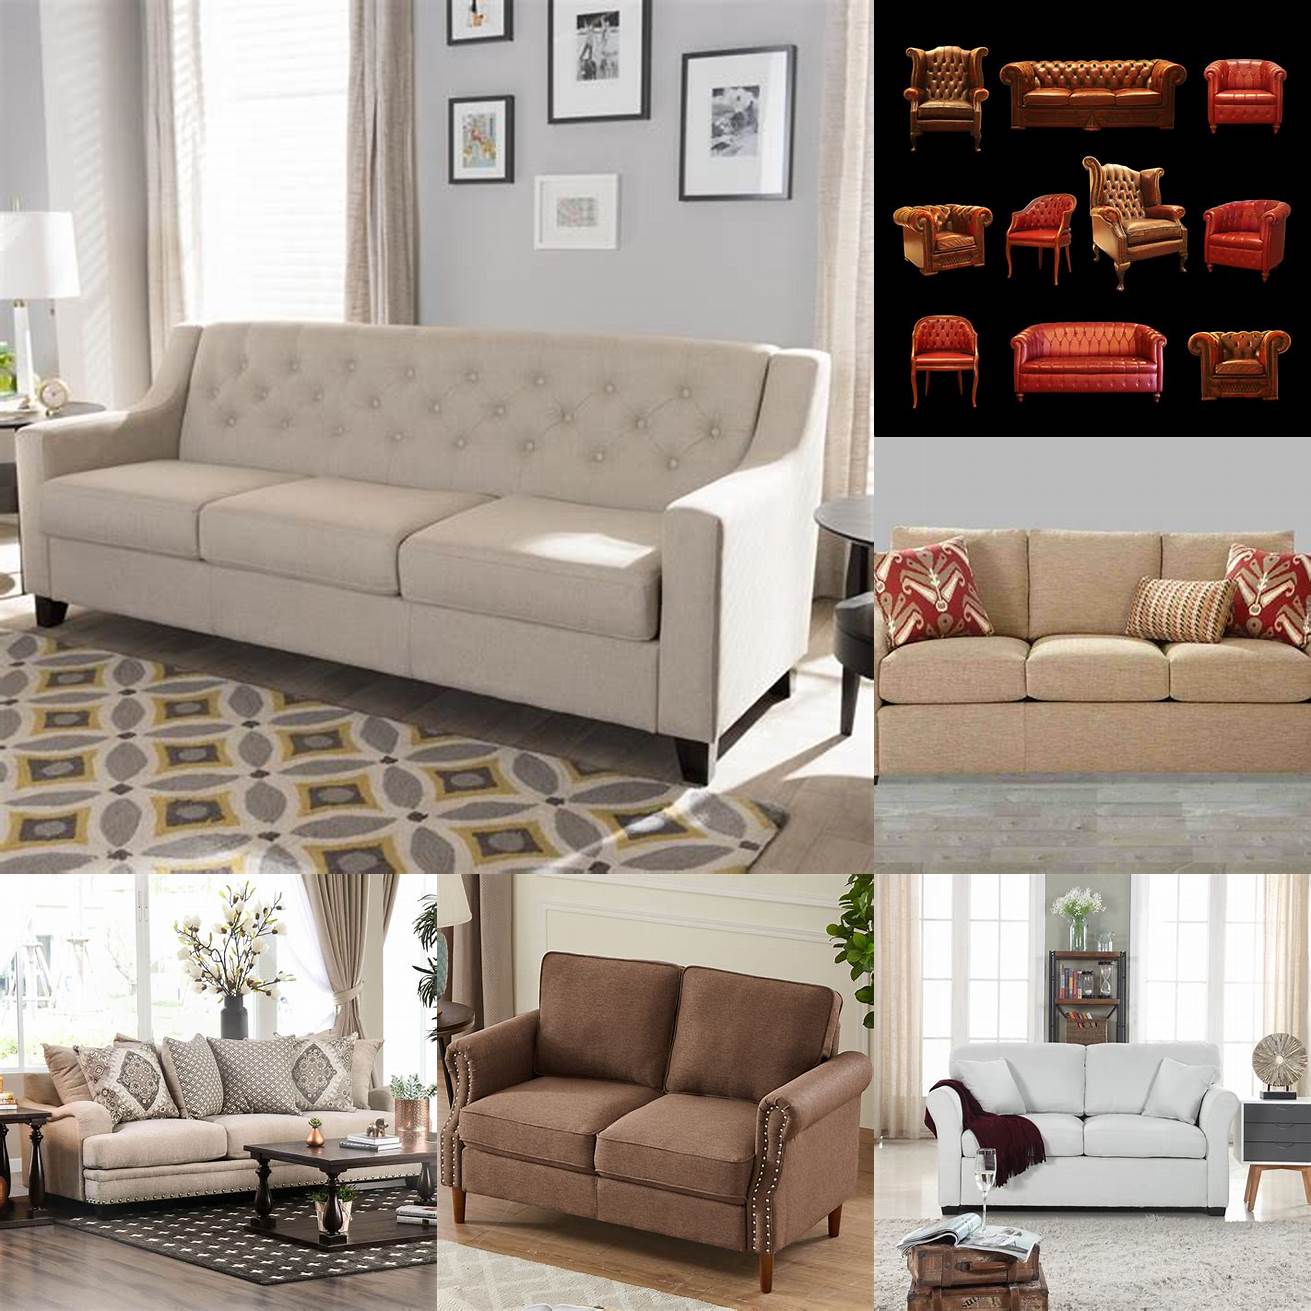 4 May require more maintenance than other types of sofas especially if upholstered in light-colored fabrics